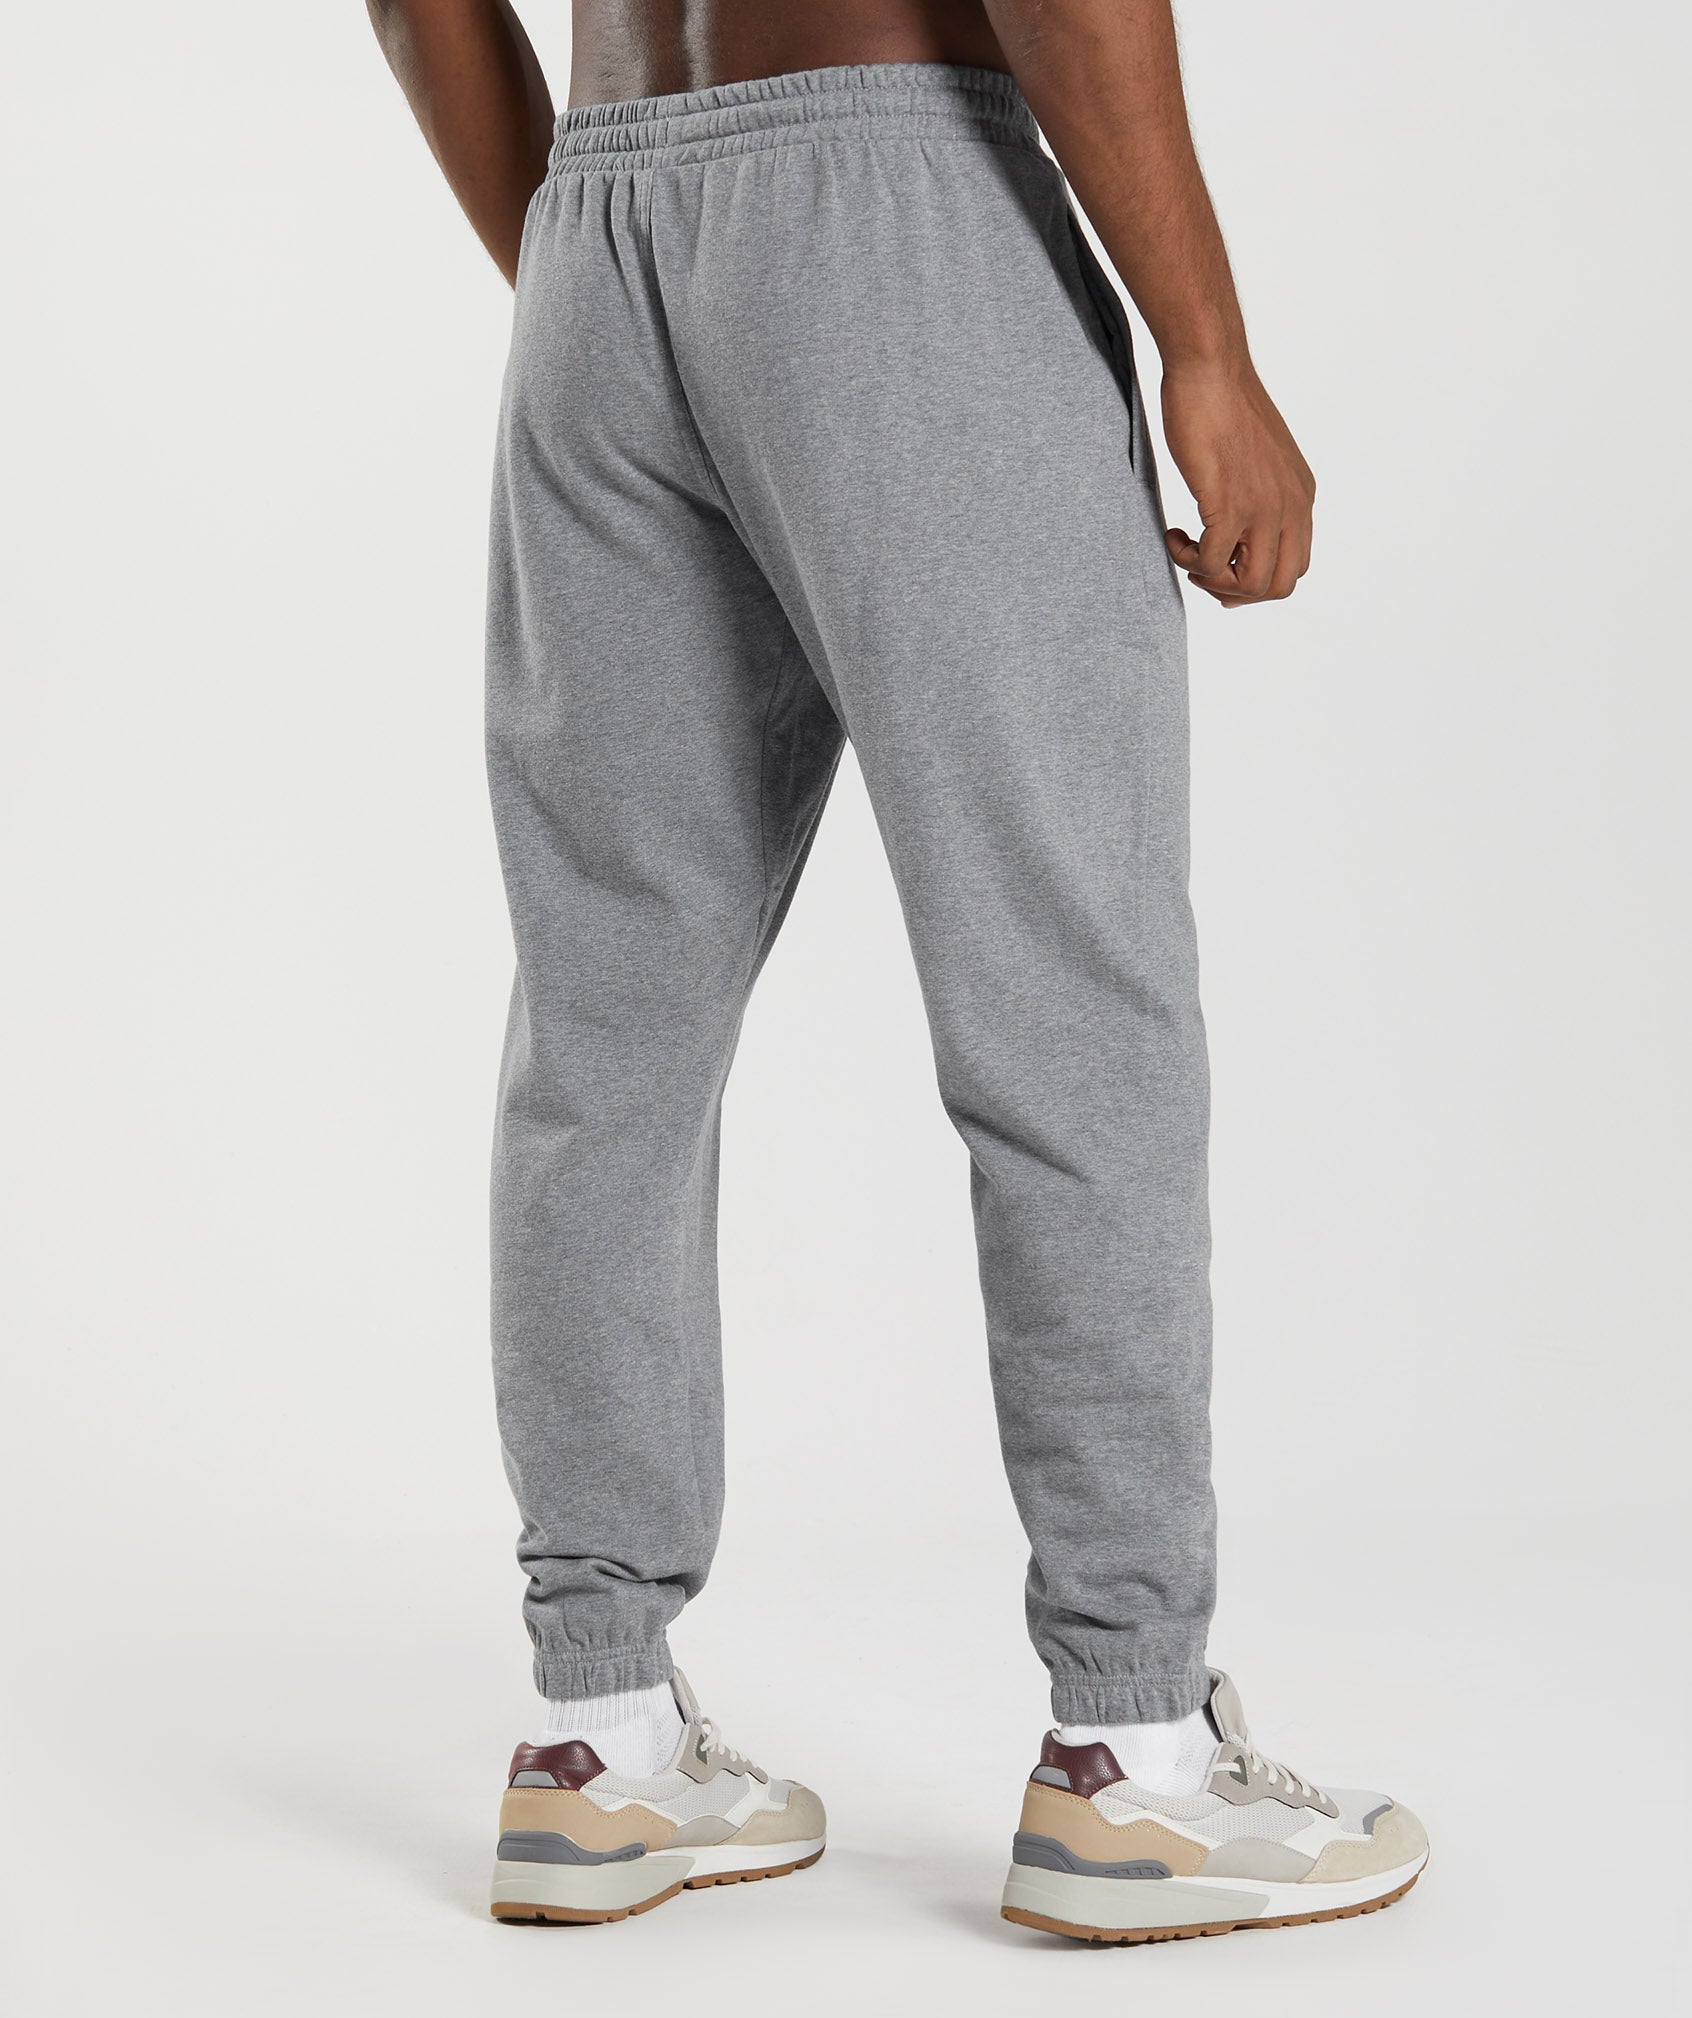 ISO Gymshark oversized joggers!!  Comfy outfits, Gymshark, Fashion